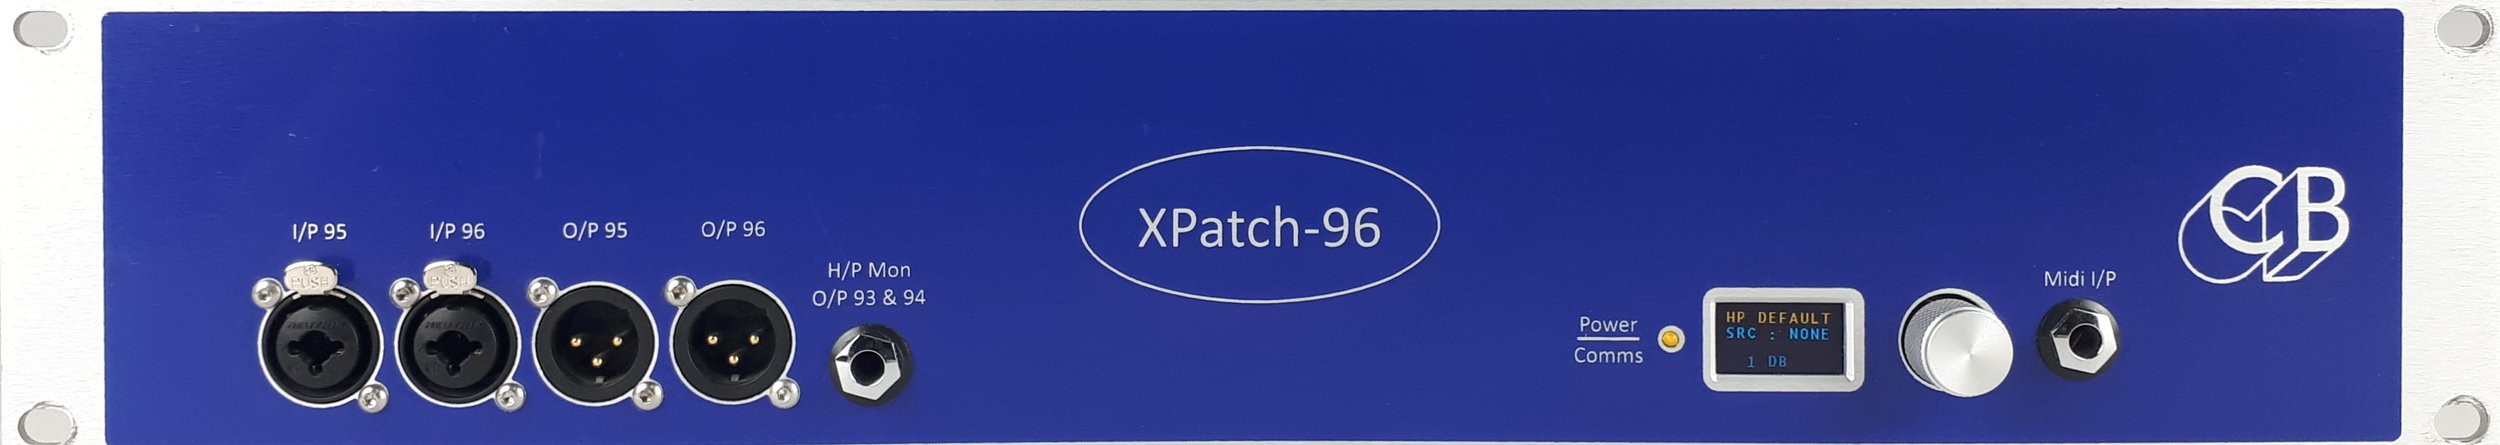 XPatch-96 Front.jpg